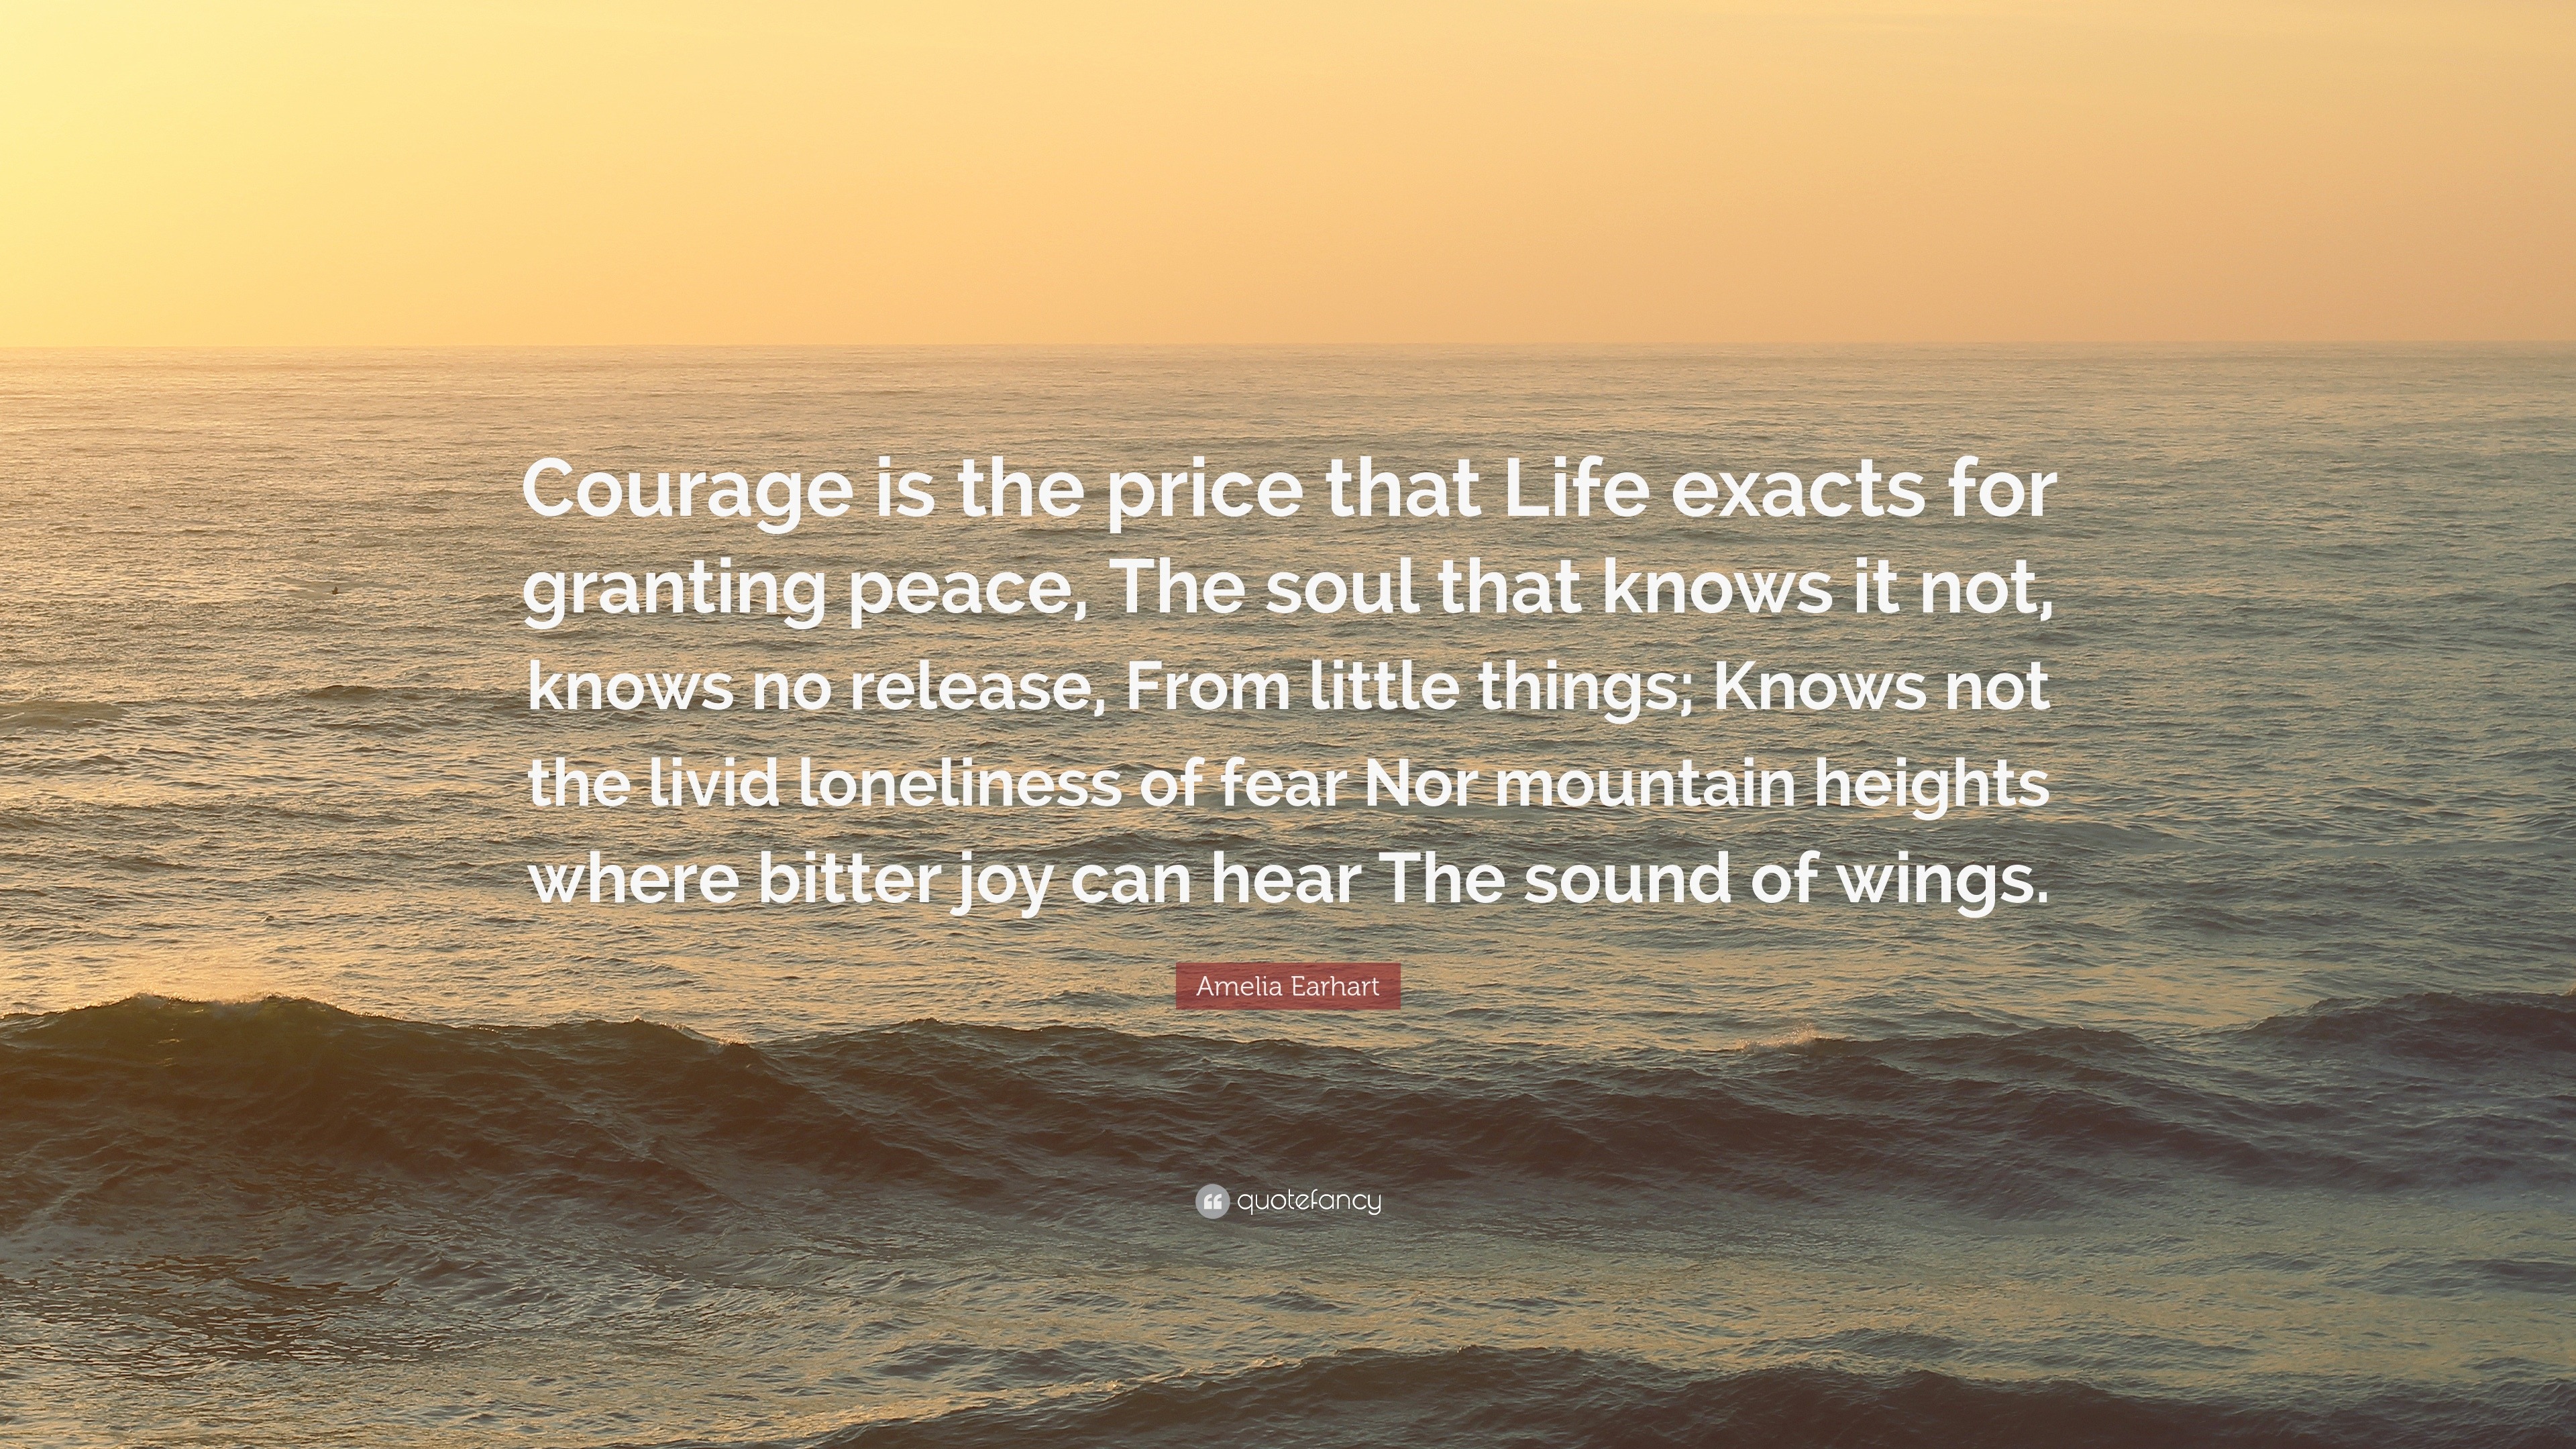 Amelia Earhart Quote: “Courage is the price that Life exacts for